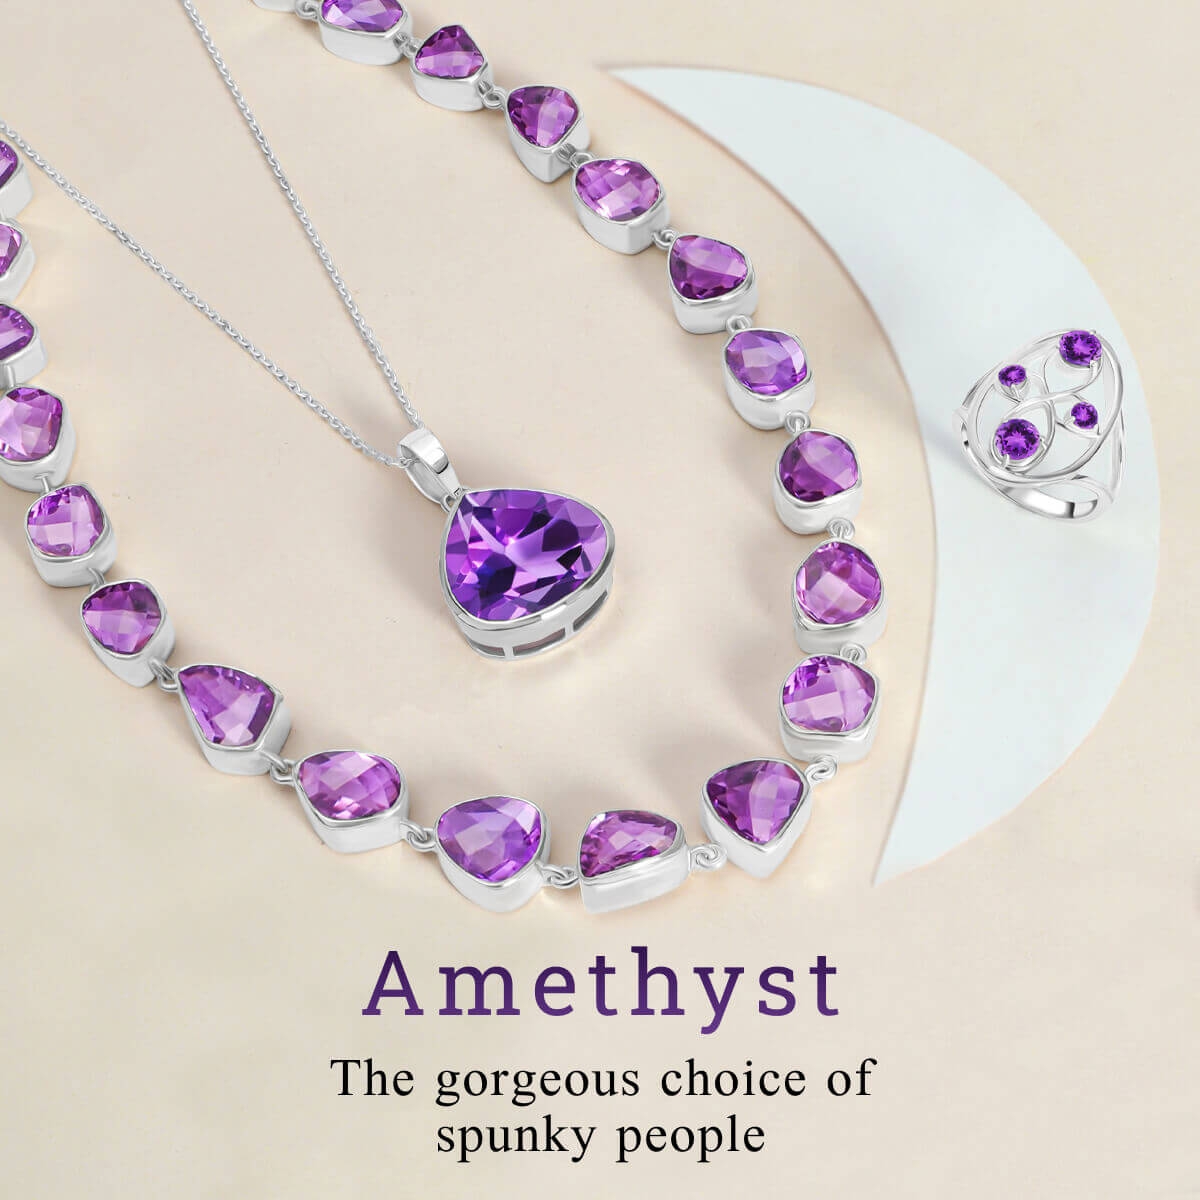 Amethyst- The gorgeous choice of spunky people